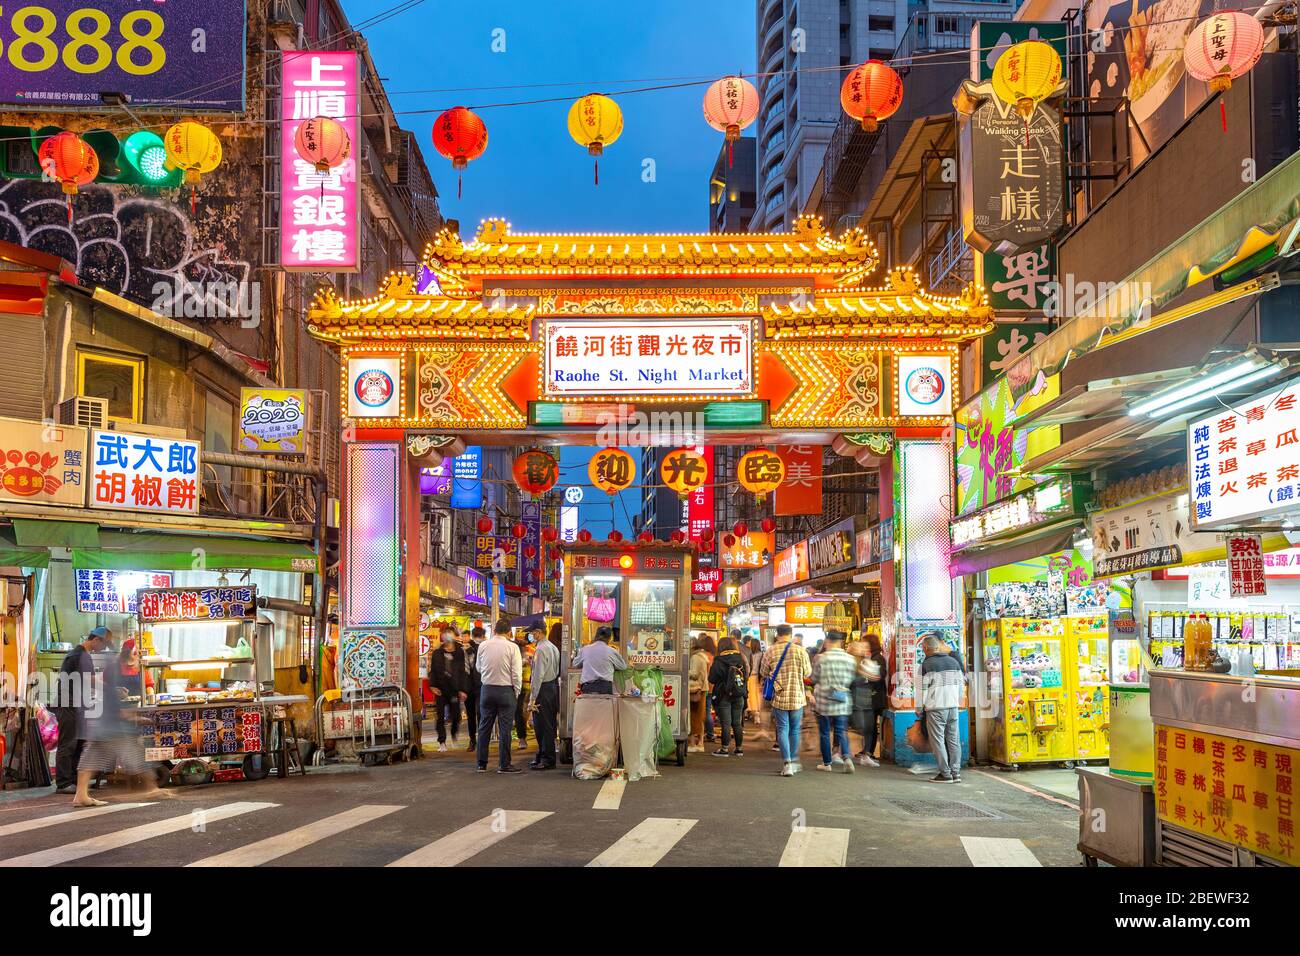 Taipei, Taiwan - March 29, 2020 : night view of the entrance of Raohe Street Night Market, one of the oldest and most famous night markets in Taipei, Stock Photo